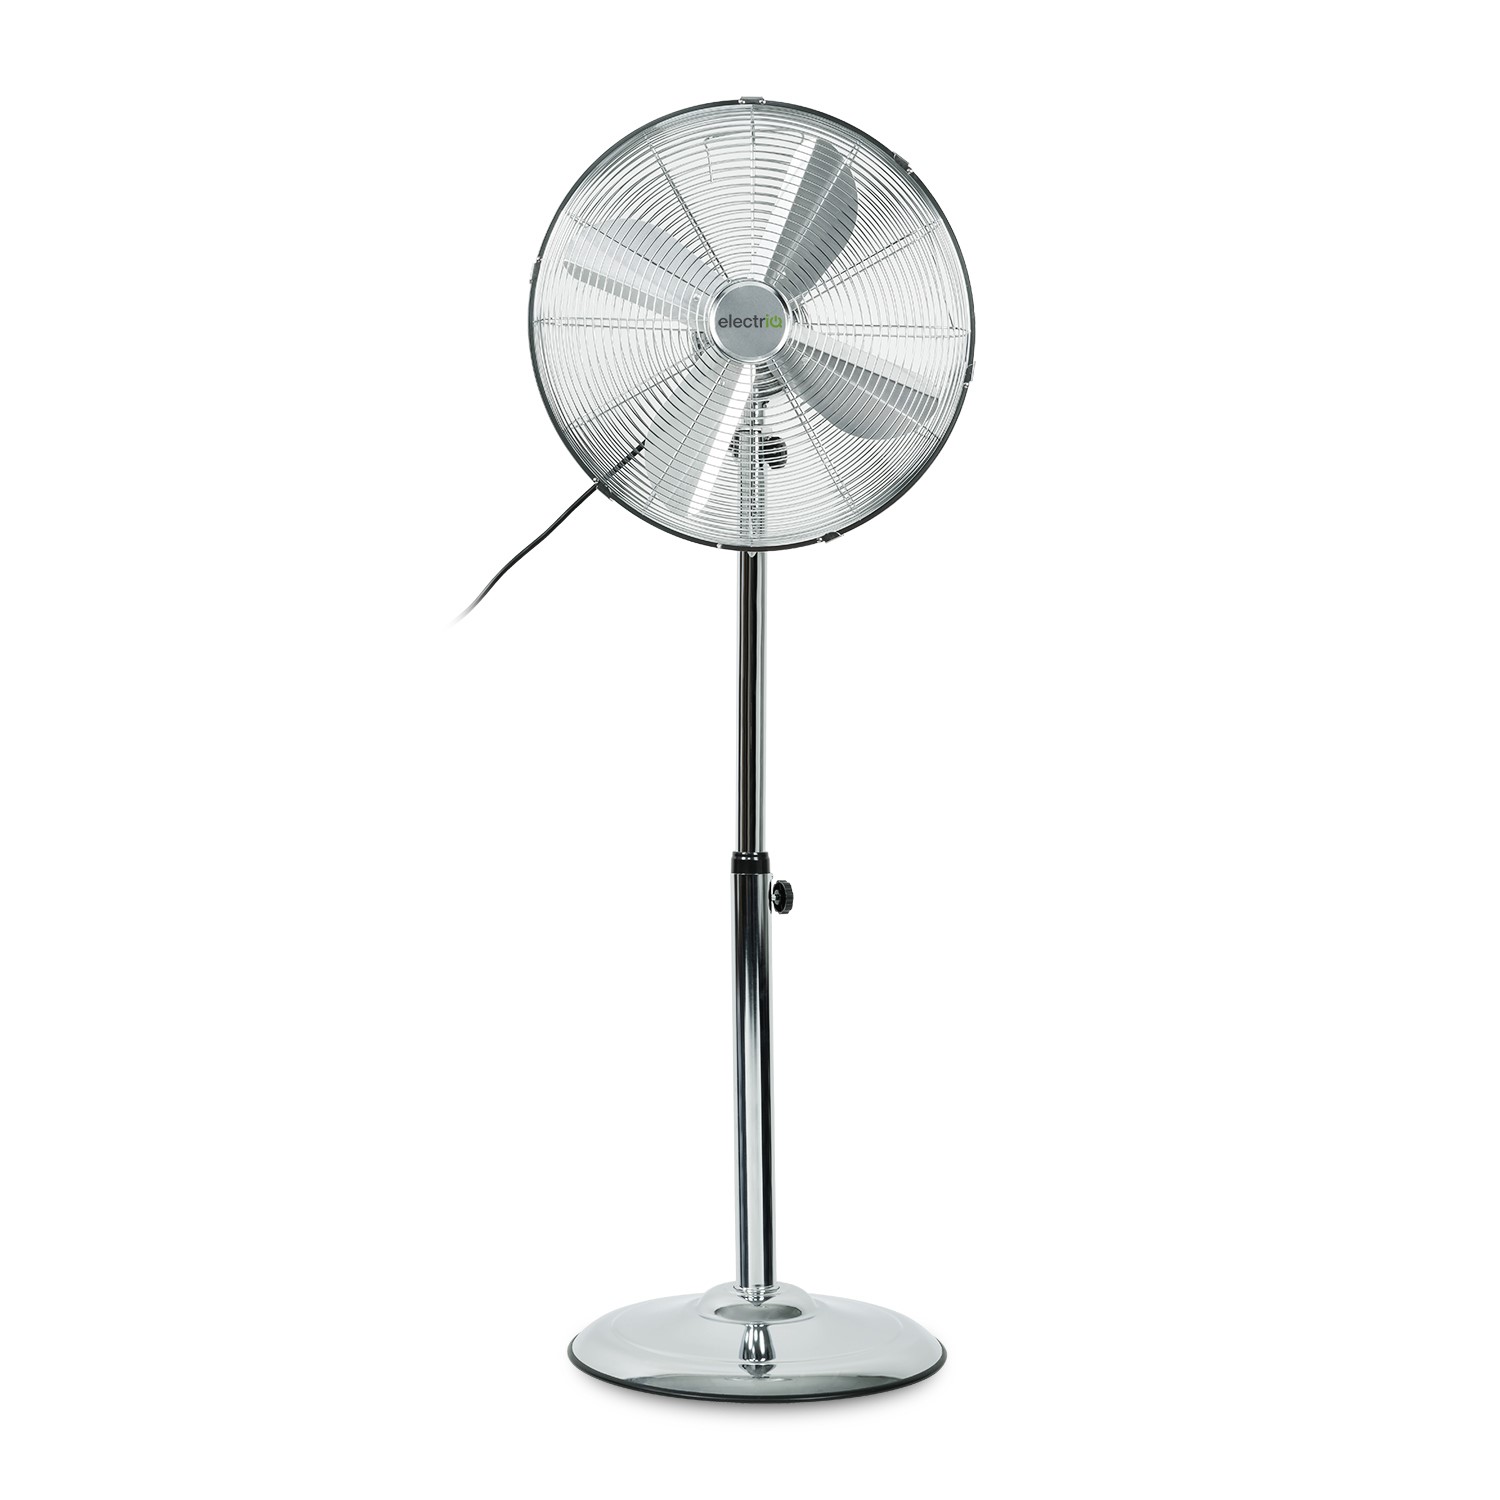 electriQ 16 Inch Chrome Pedestal Fan with Adjustable Stand and Oscillation Function